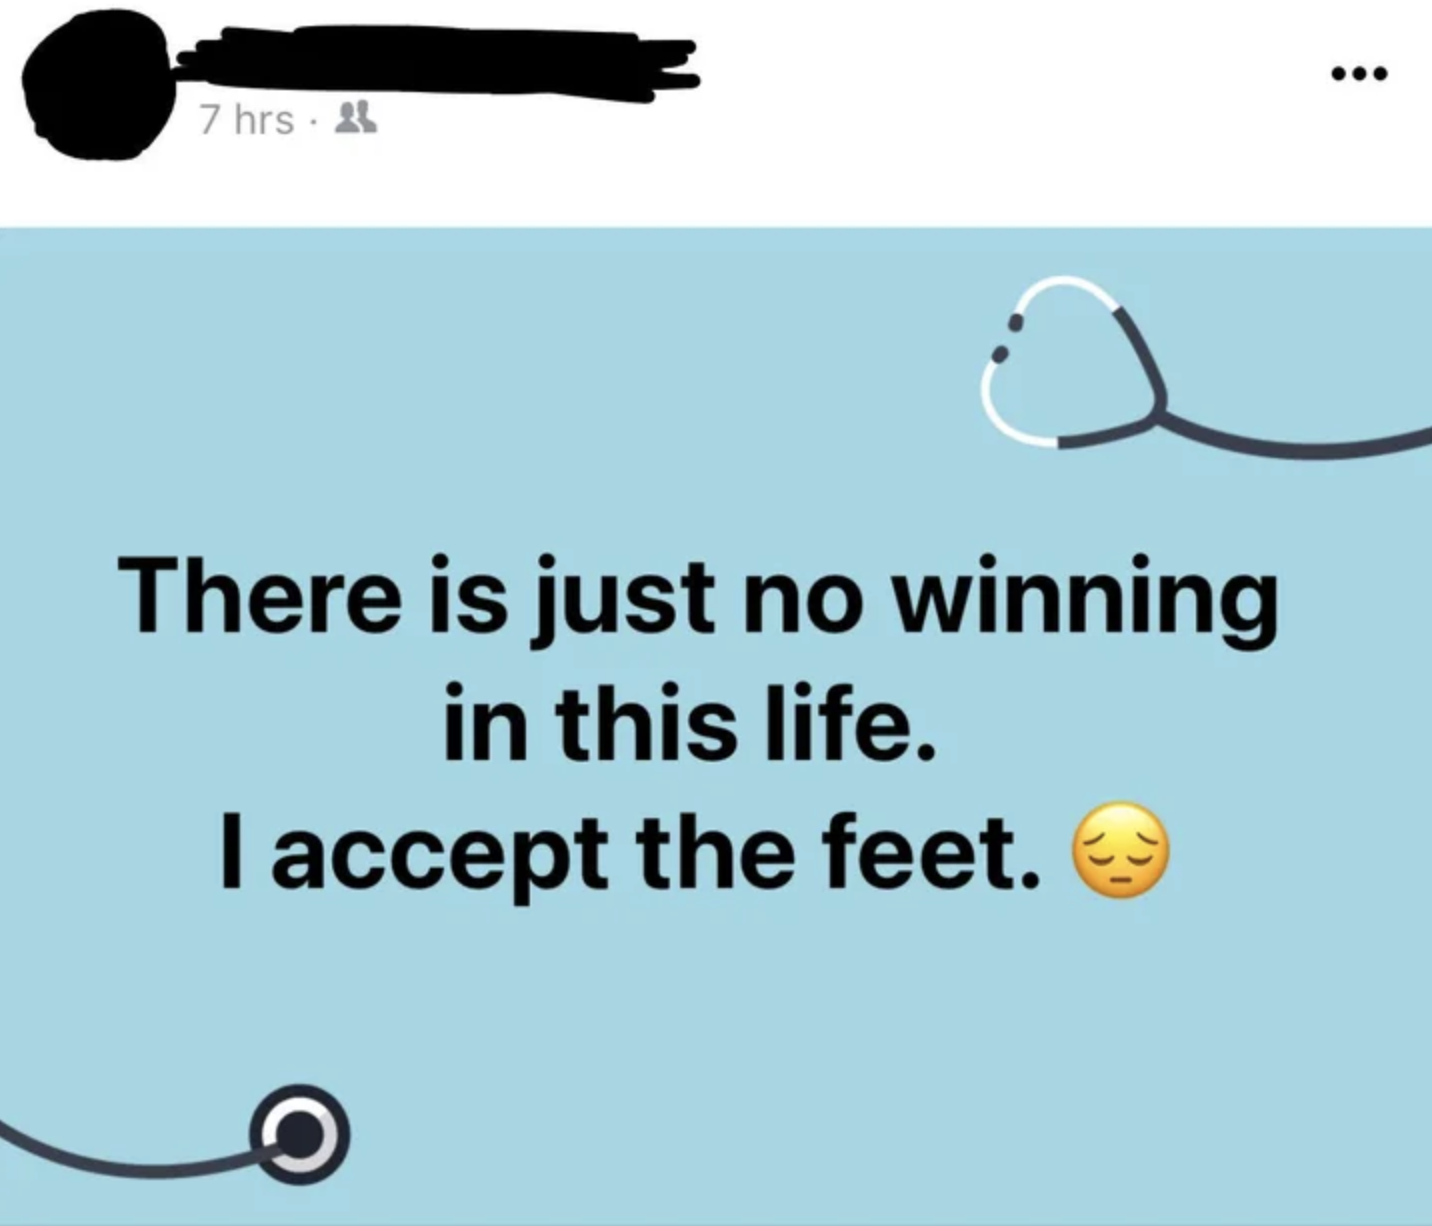 Person misspelling defeat as the feet